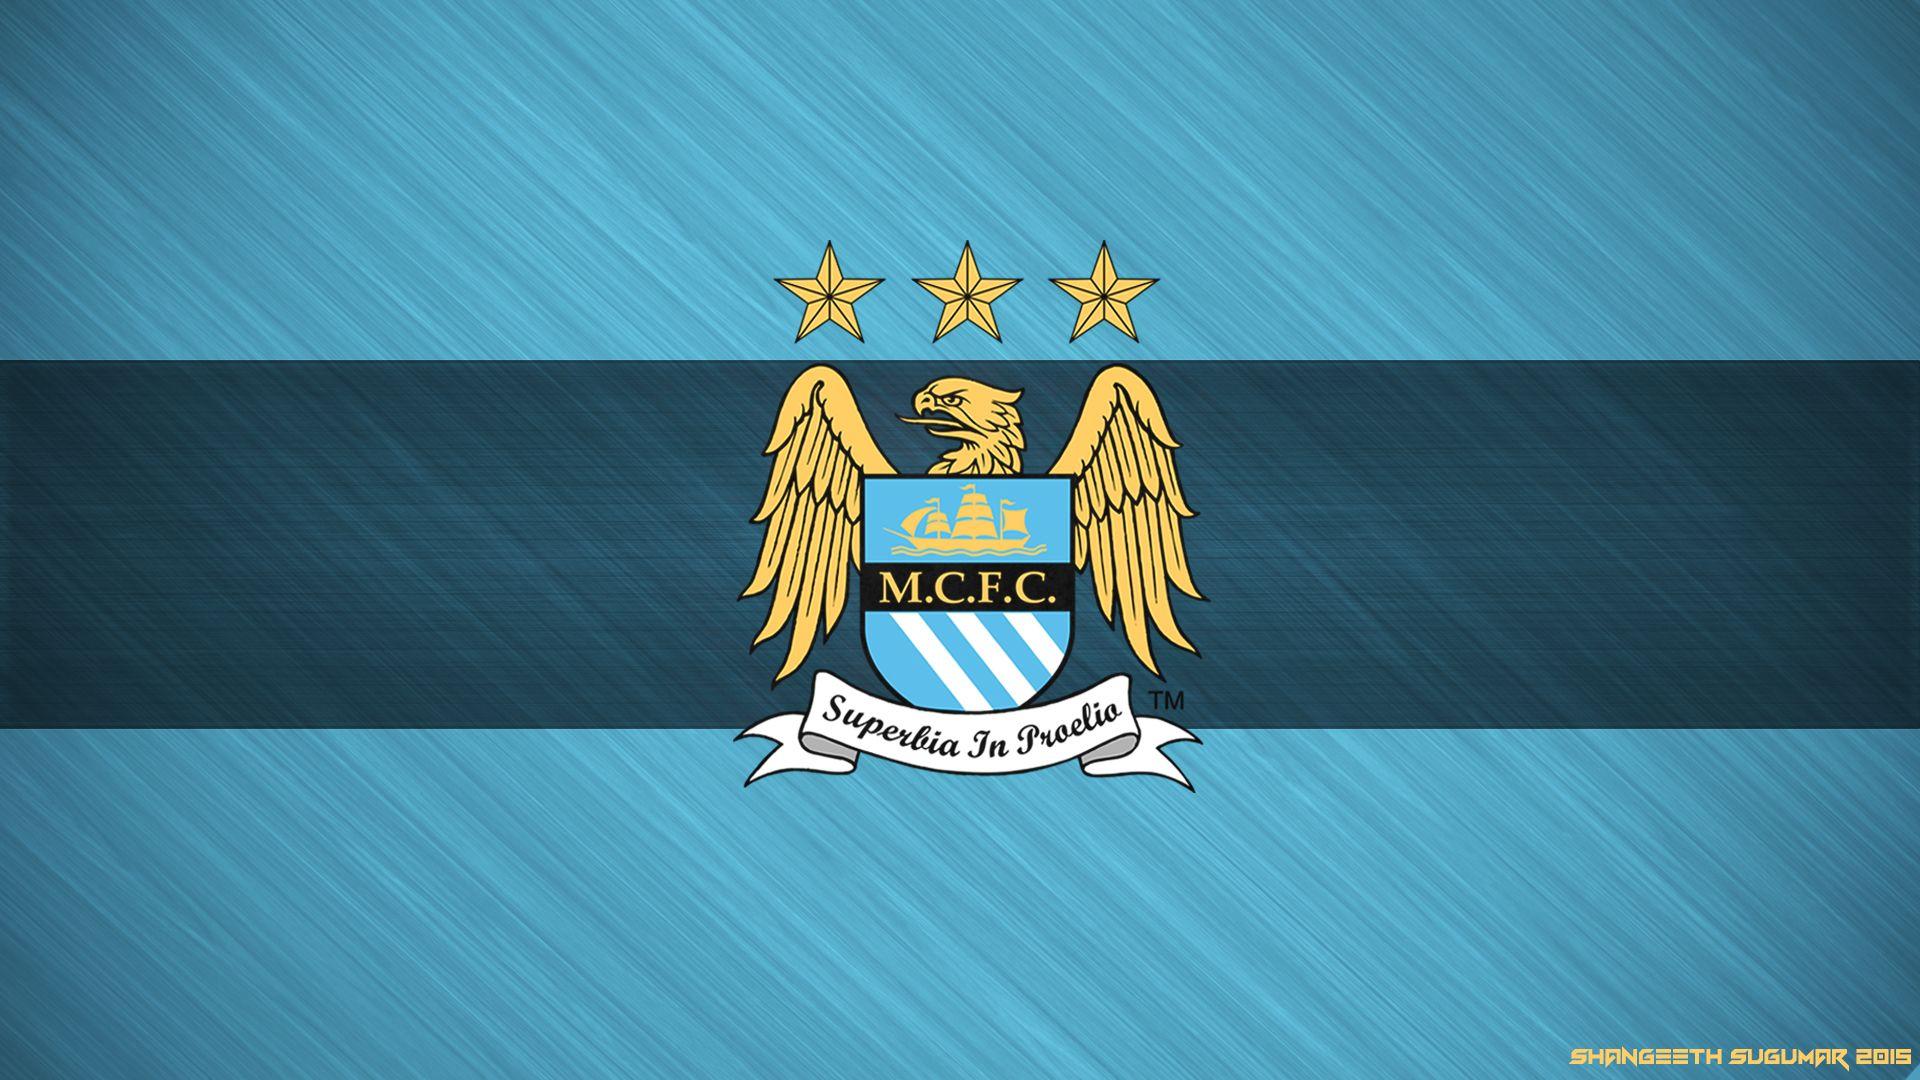 Man City Wallpaper Collection For Free Download. HD Wallpaper